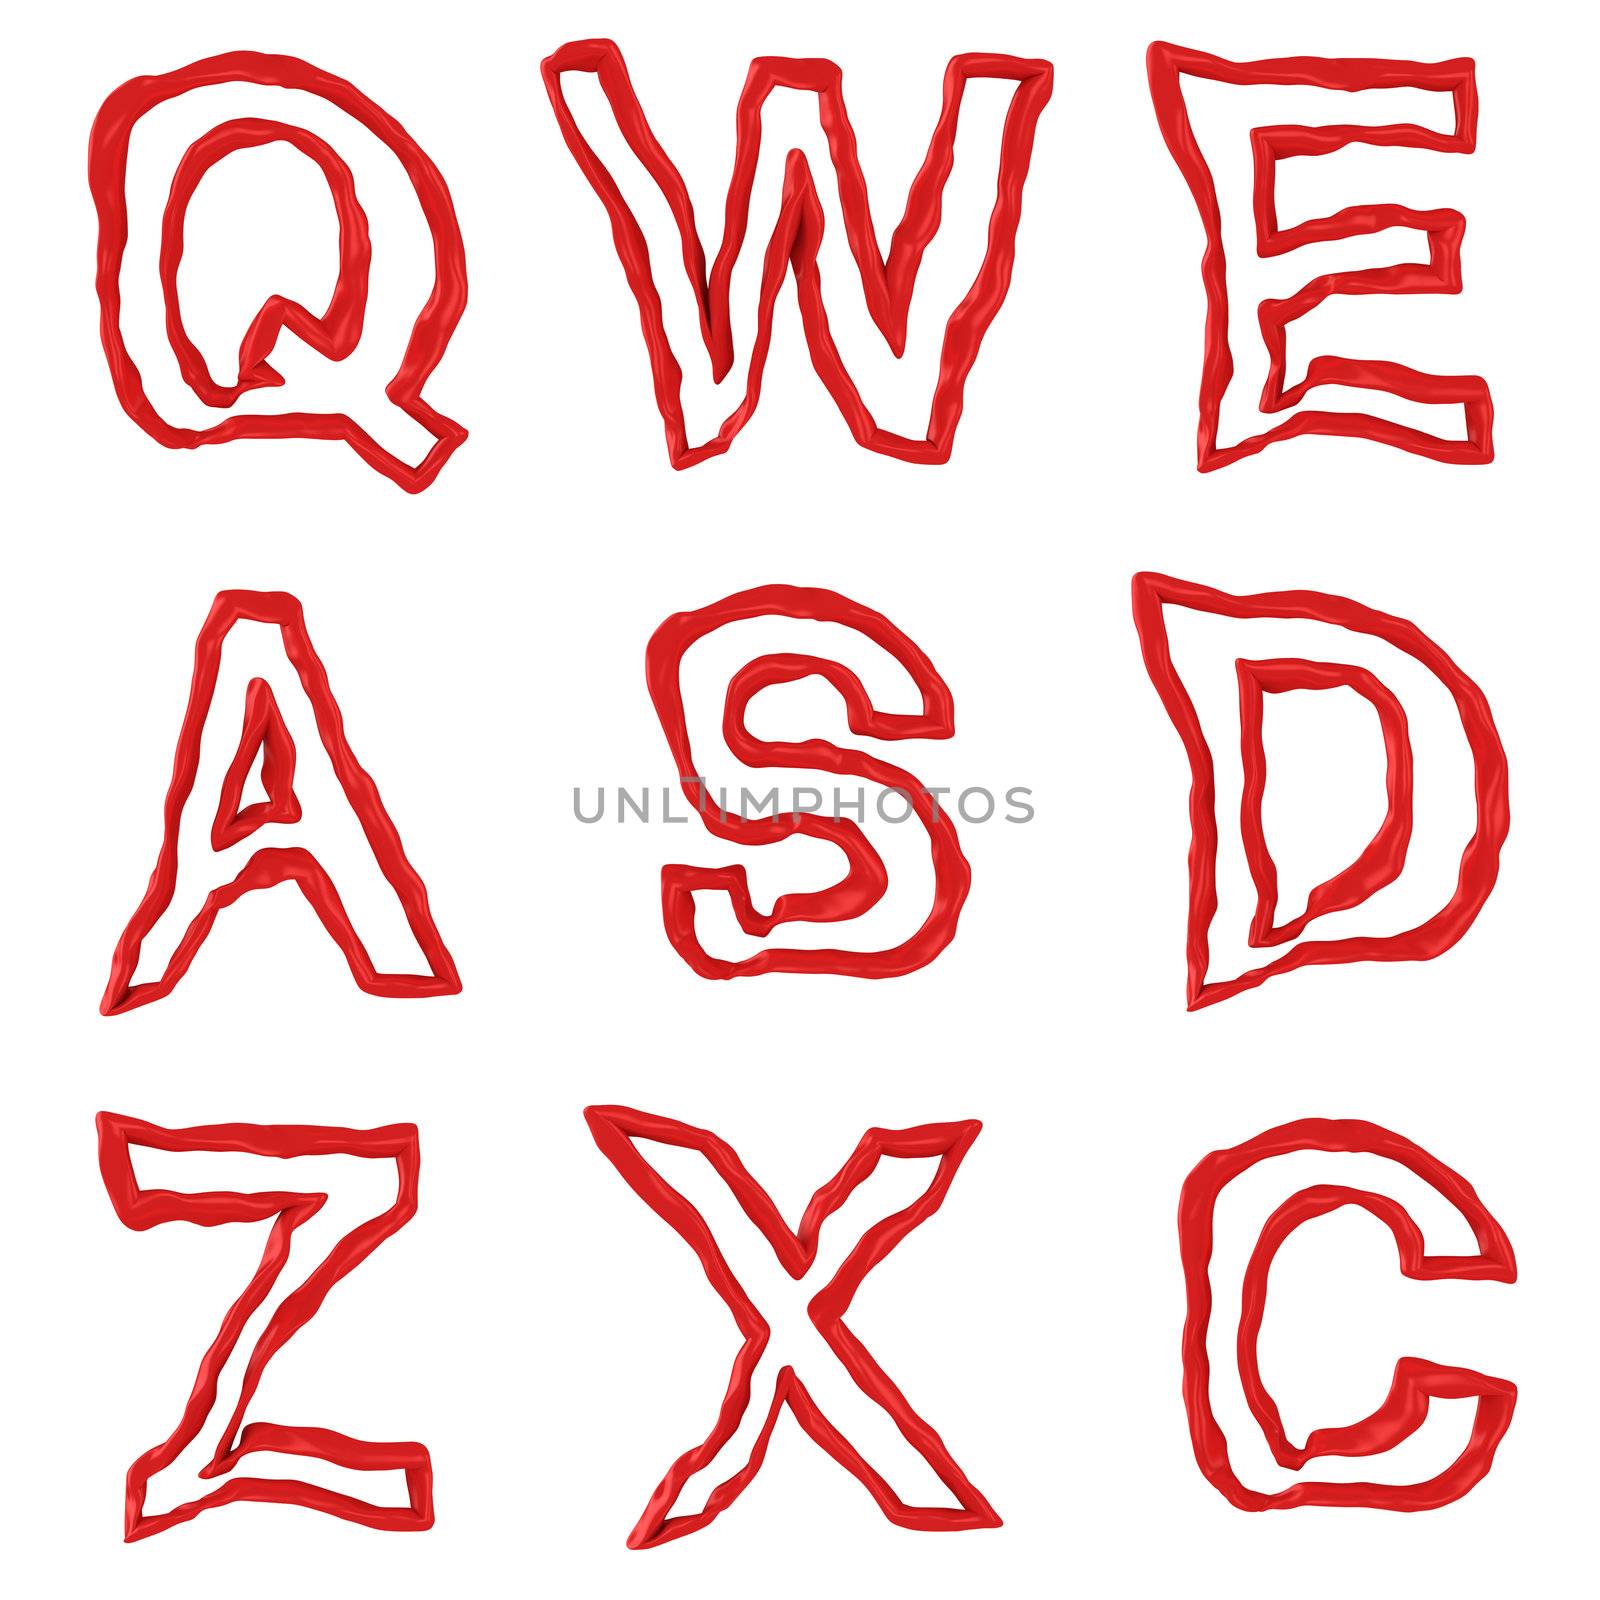 Red capital letters of alphabet isolated on the white background